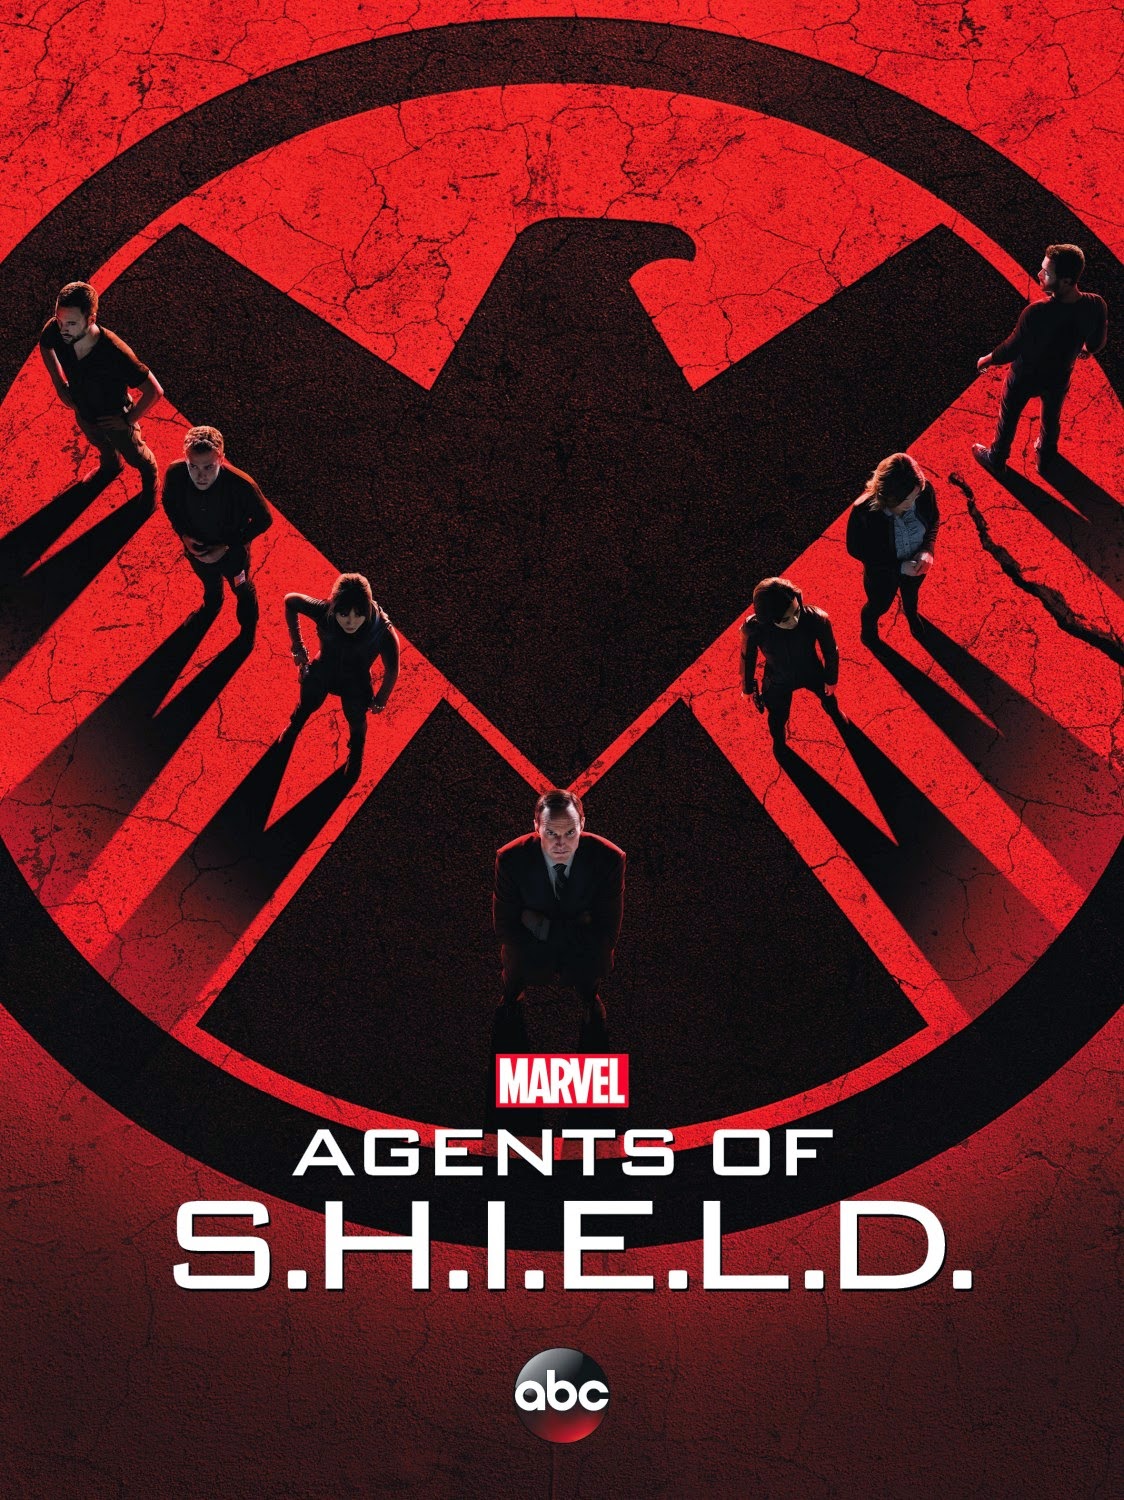 Marvel’s Agents of SHIELD Teaser Television Poster